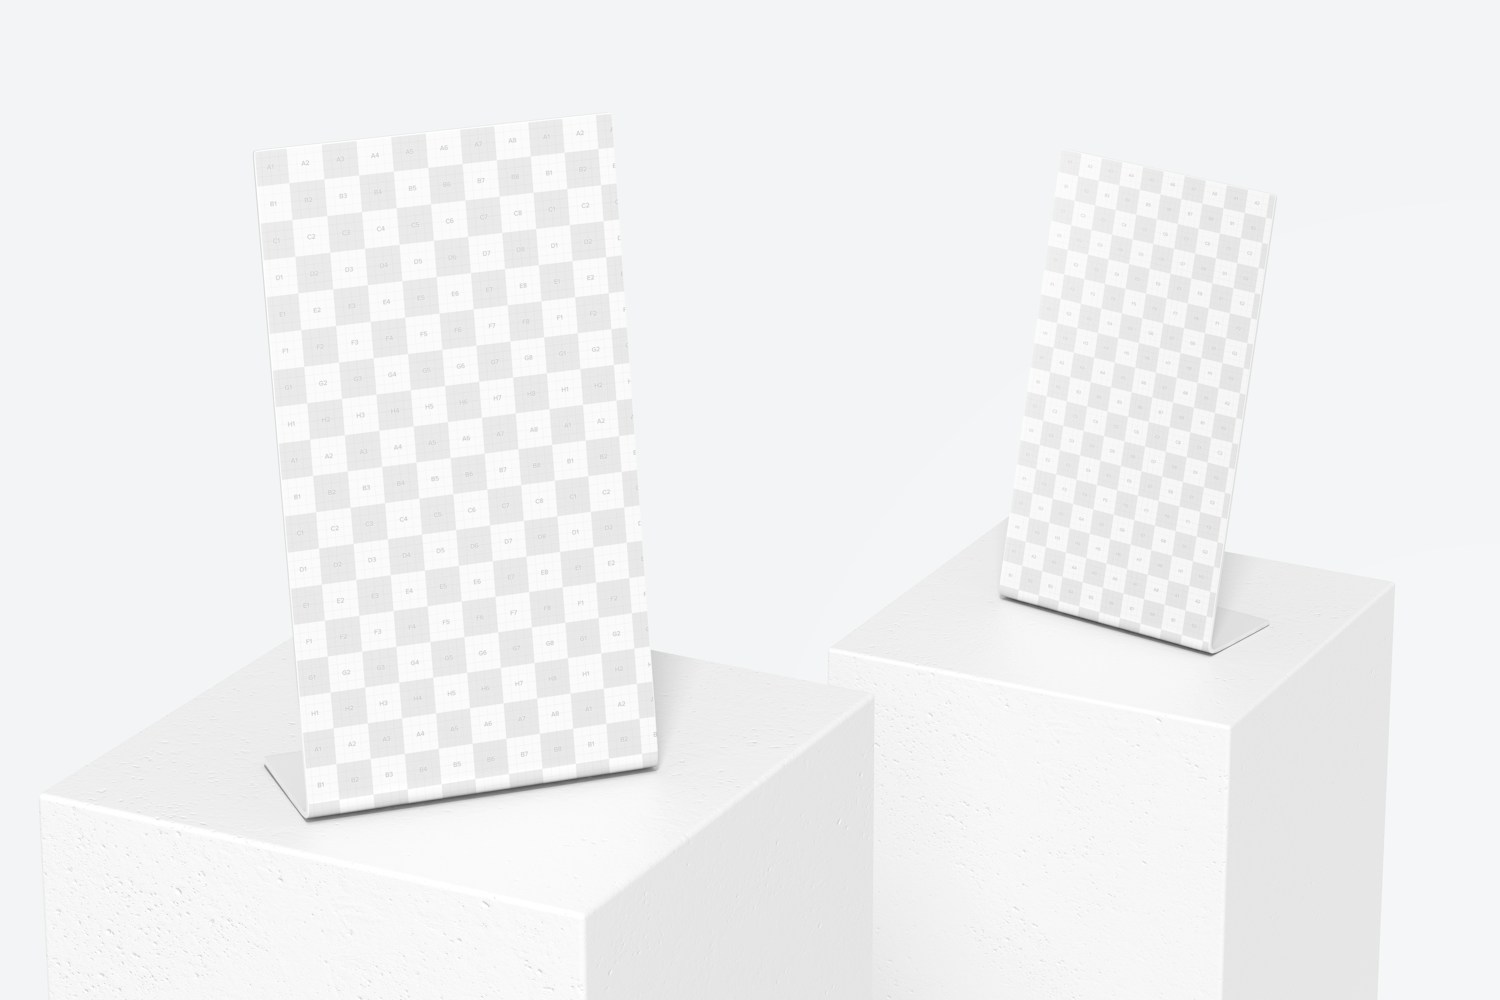 Acrylic Table Tents Mockup, Perspective